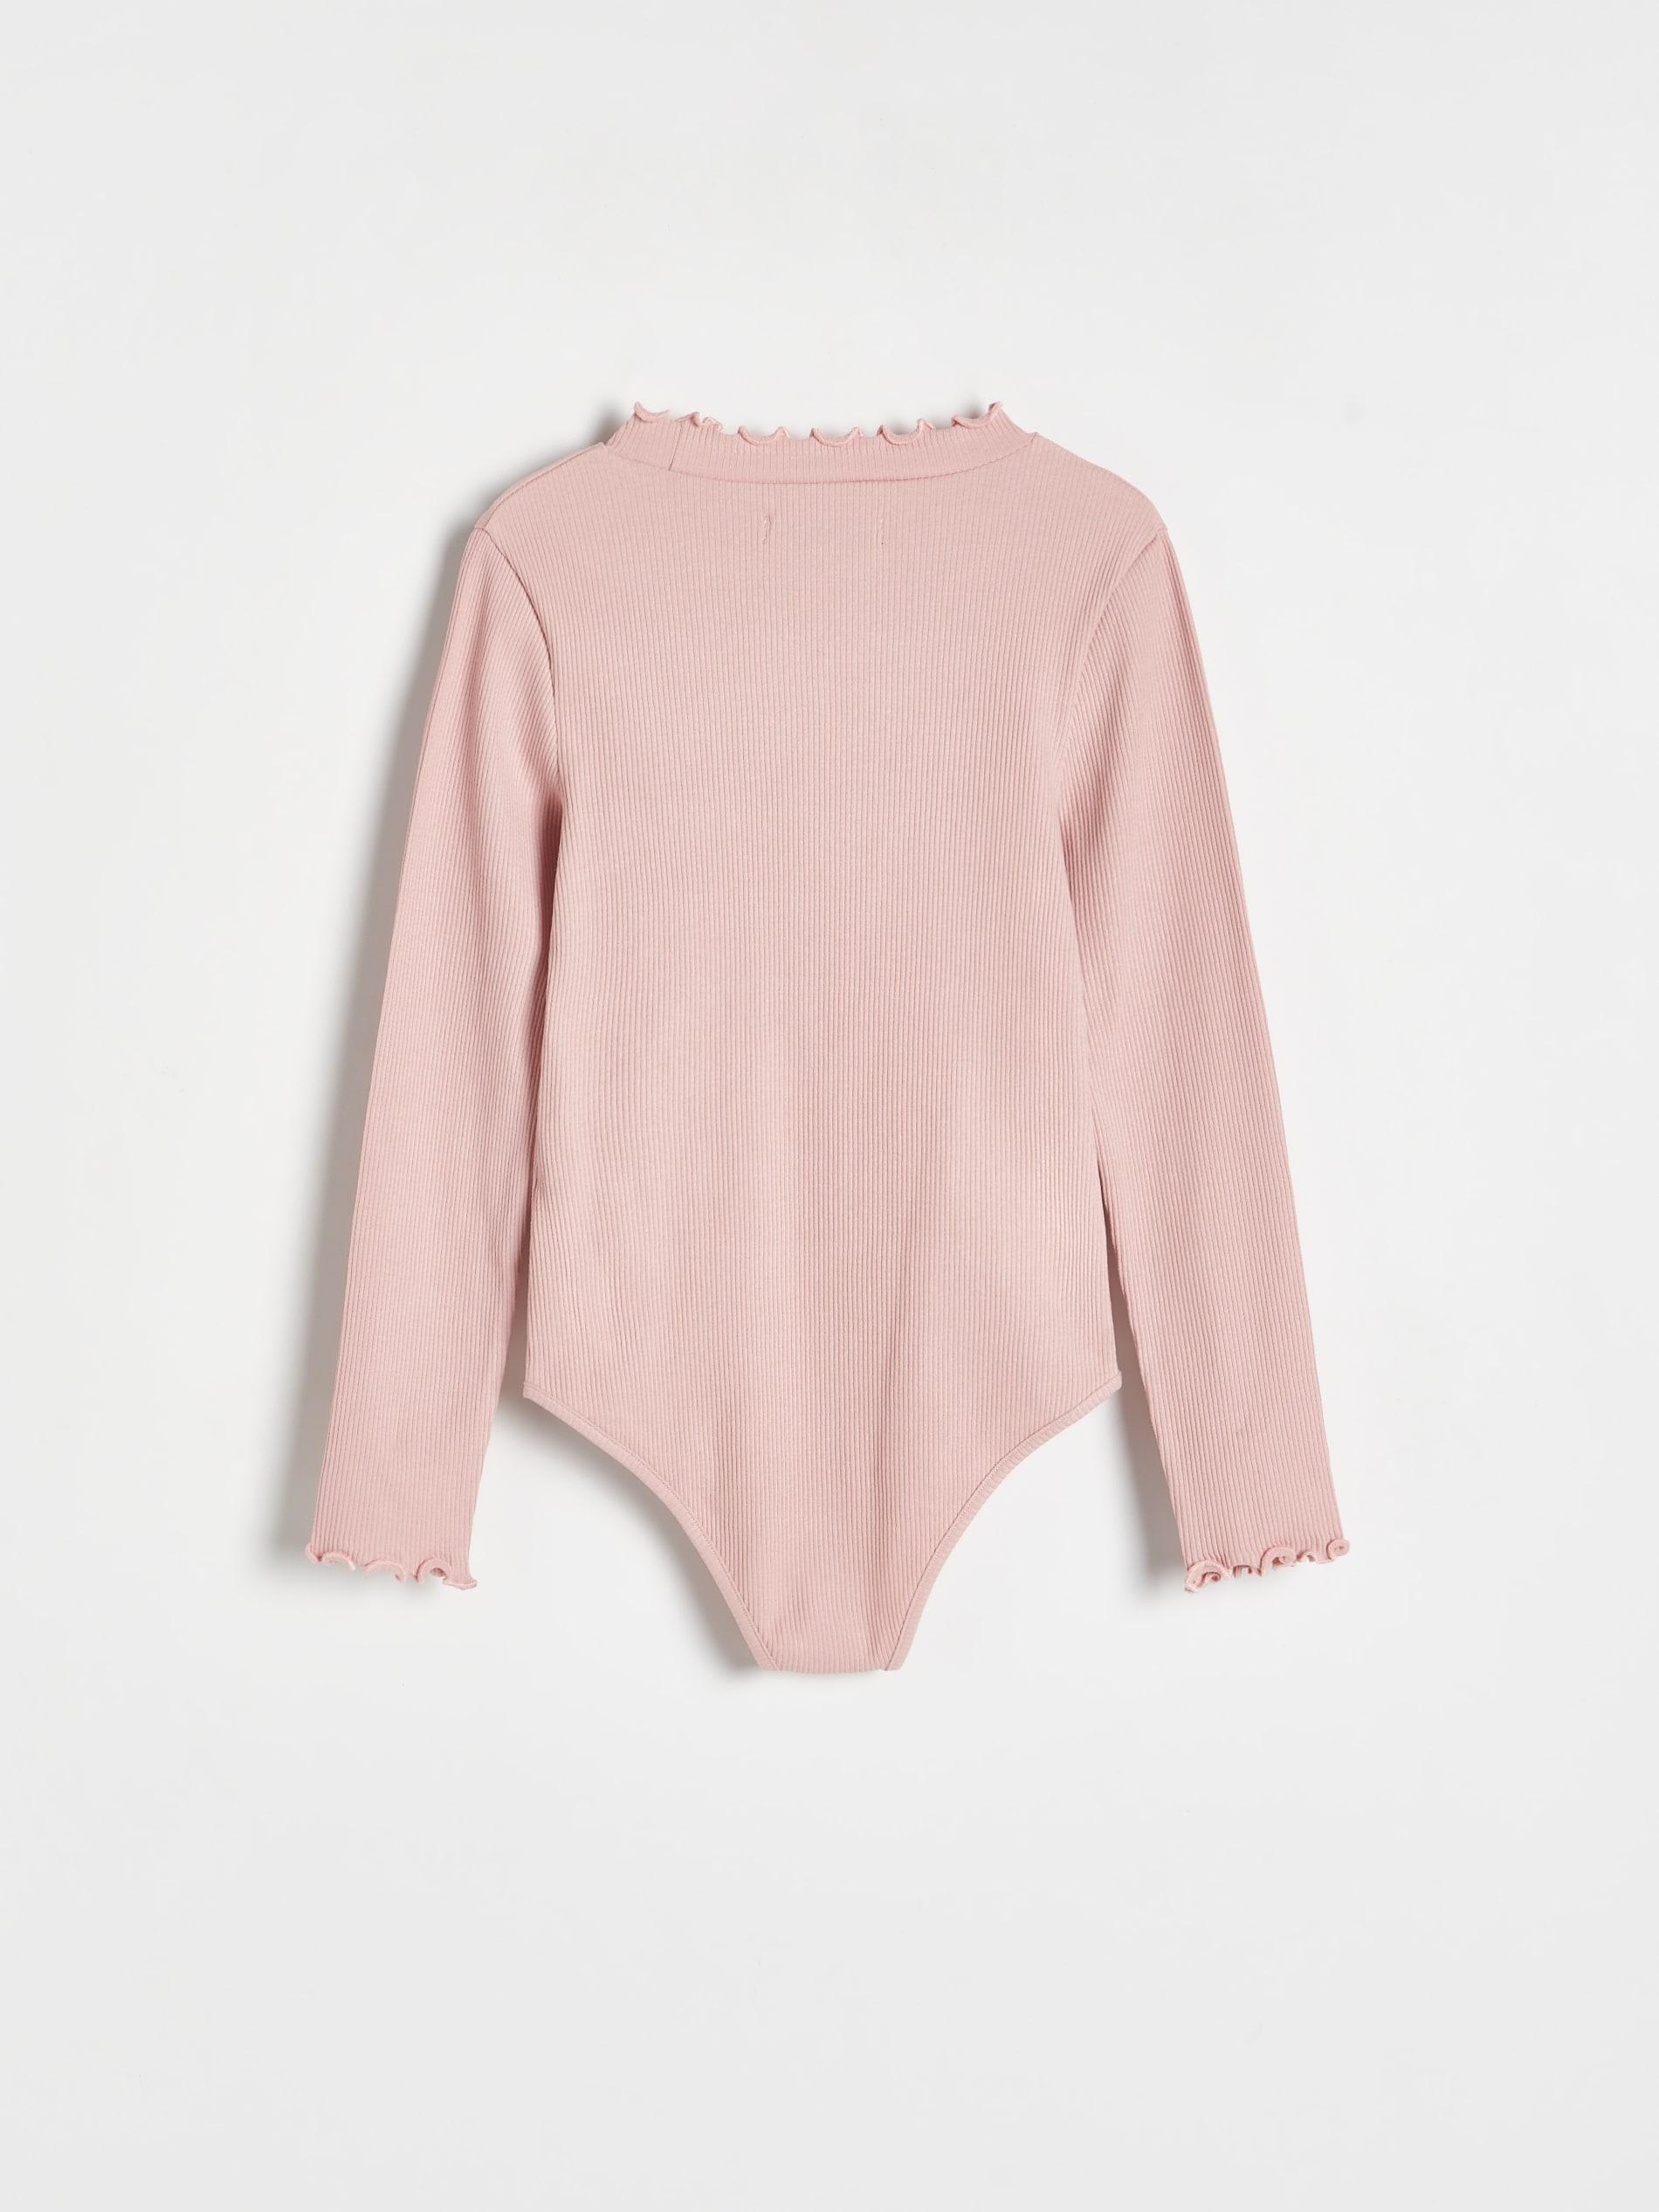 Reserved - Pink Embroidery Cotton Bodysuit, Kids Girls